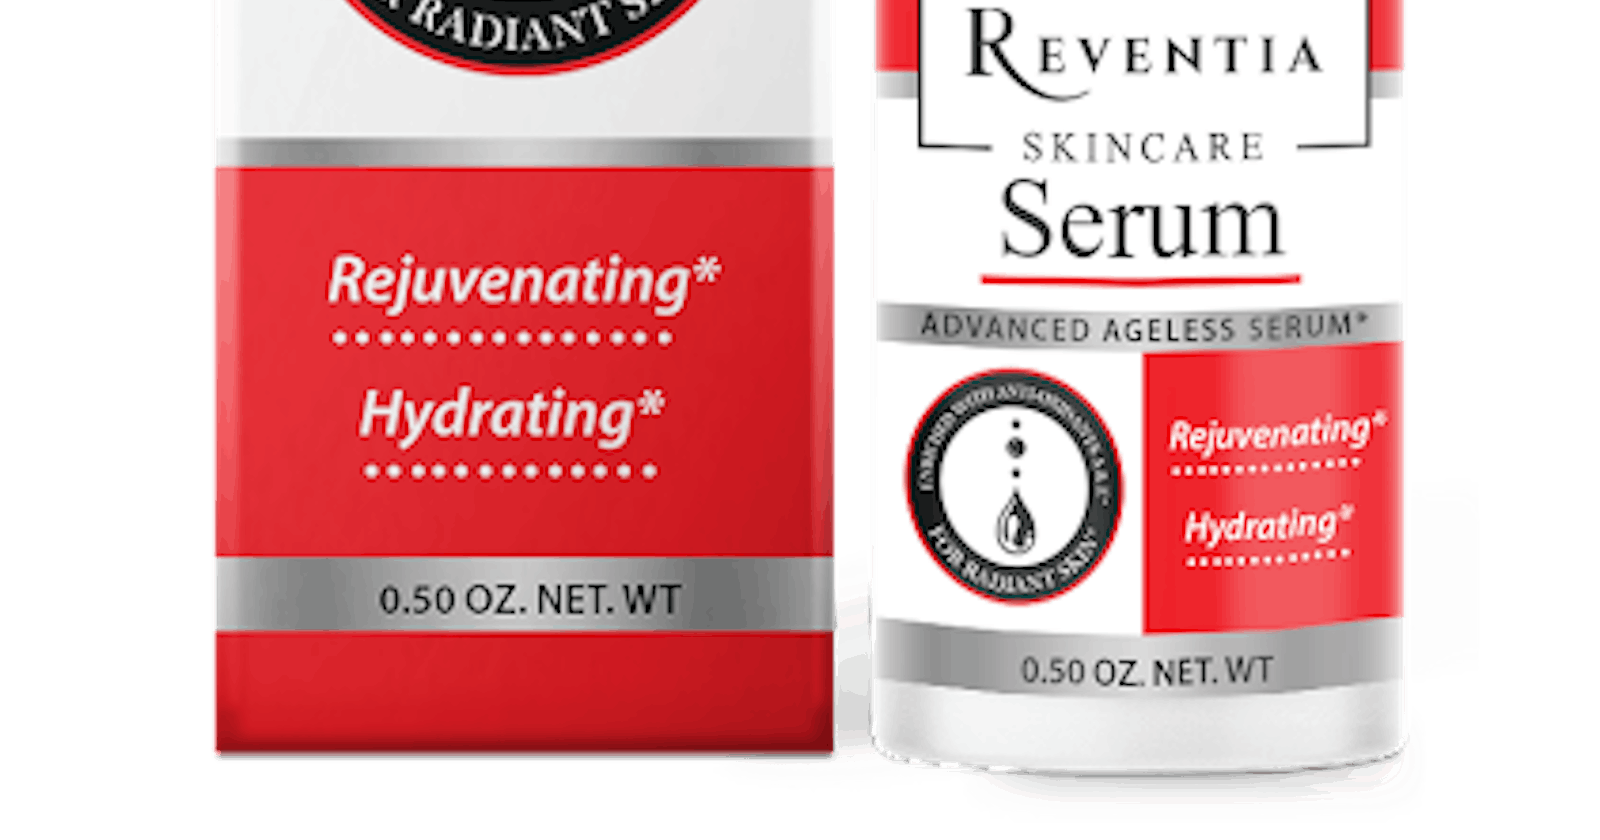 Reventia: Discover the Fountain of Youth for Your Skin